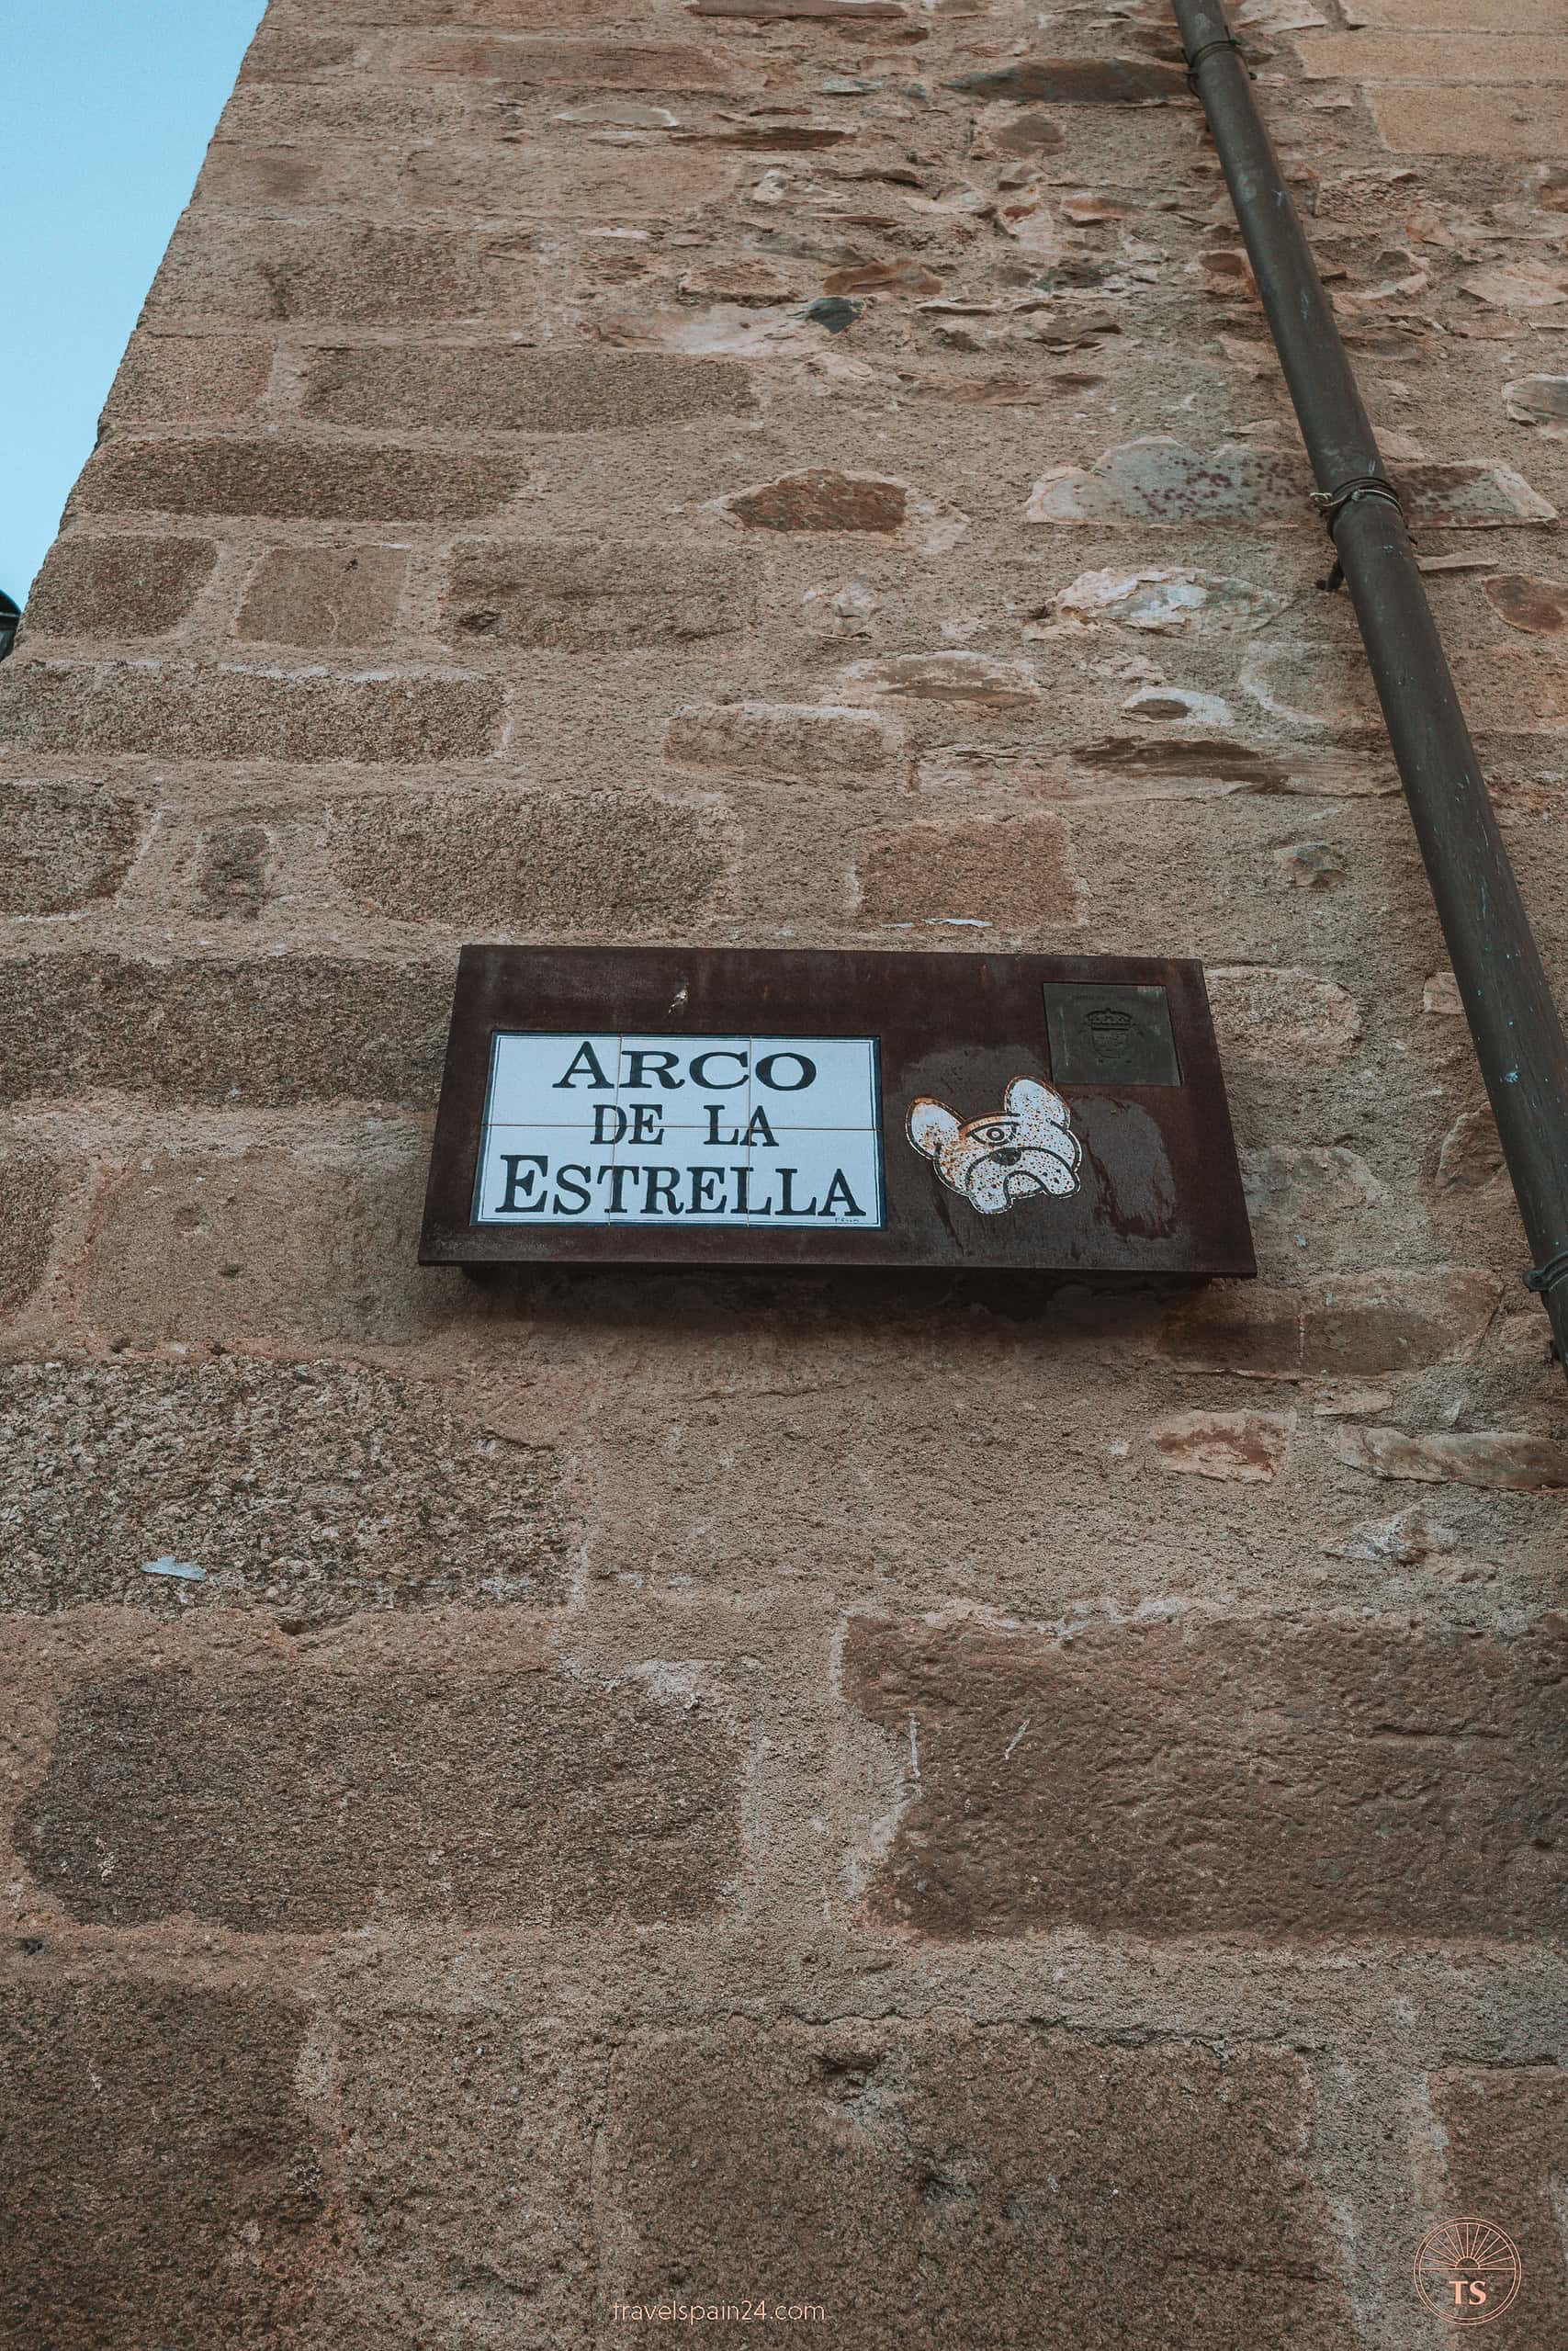 Street sign for Arco de la Estrella in Cáceres, the renowned arch leading to the main square, marking a key entry point into the historic city center.